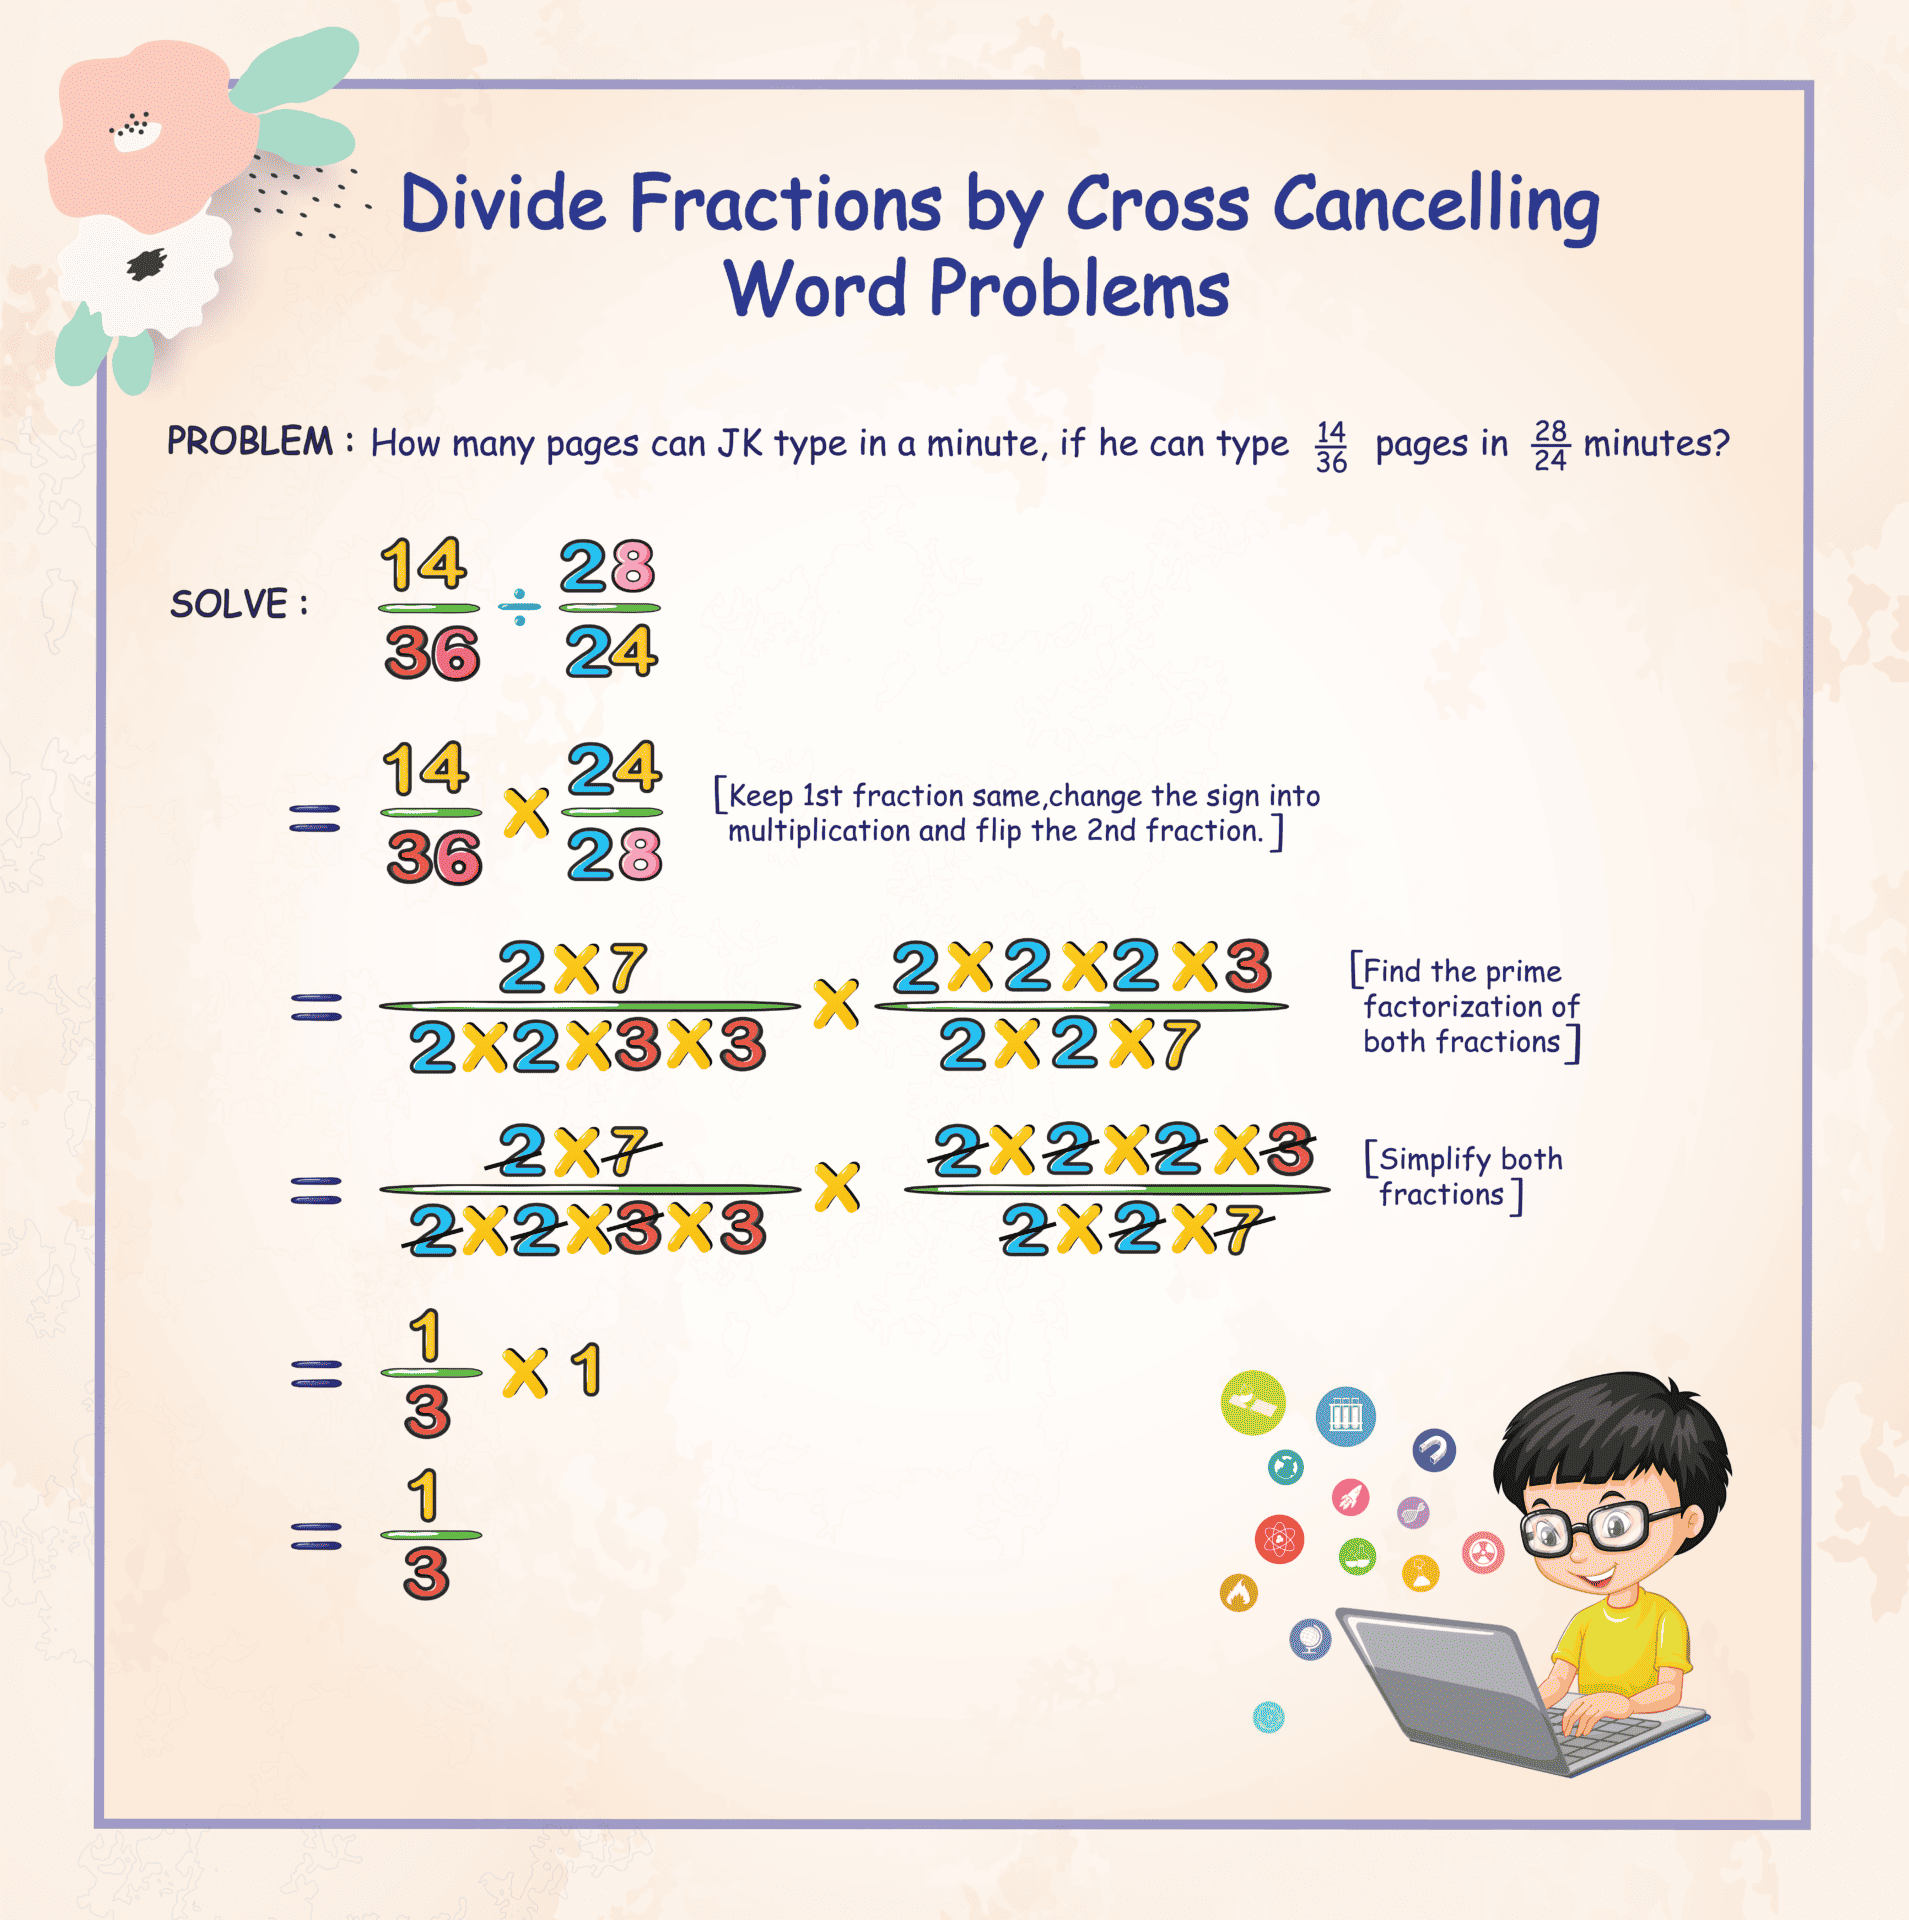 Divide fractions by cross cancelling word problems